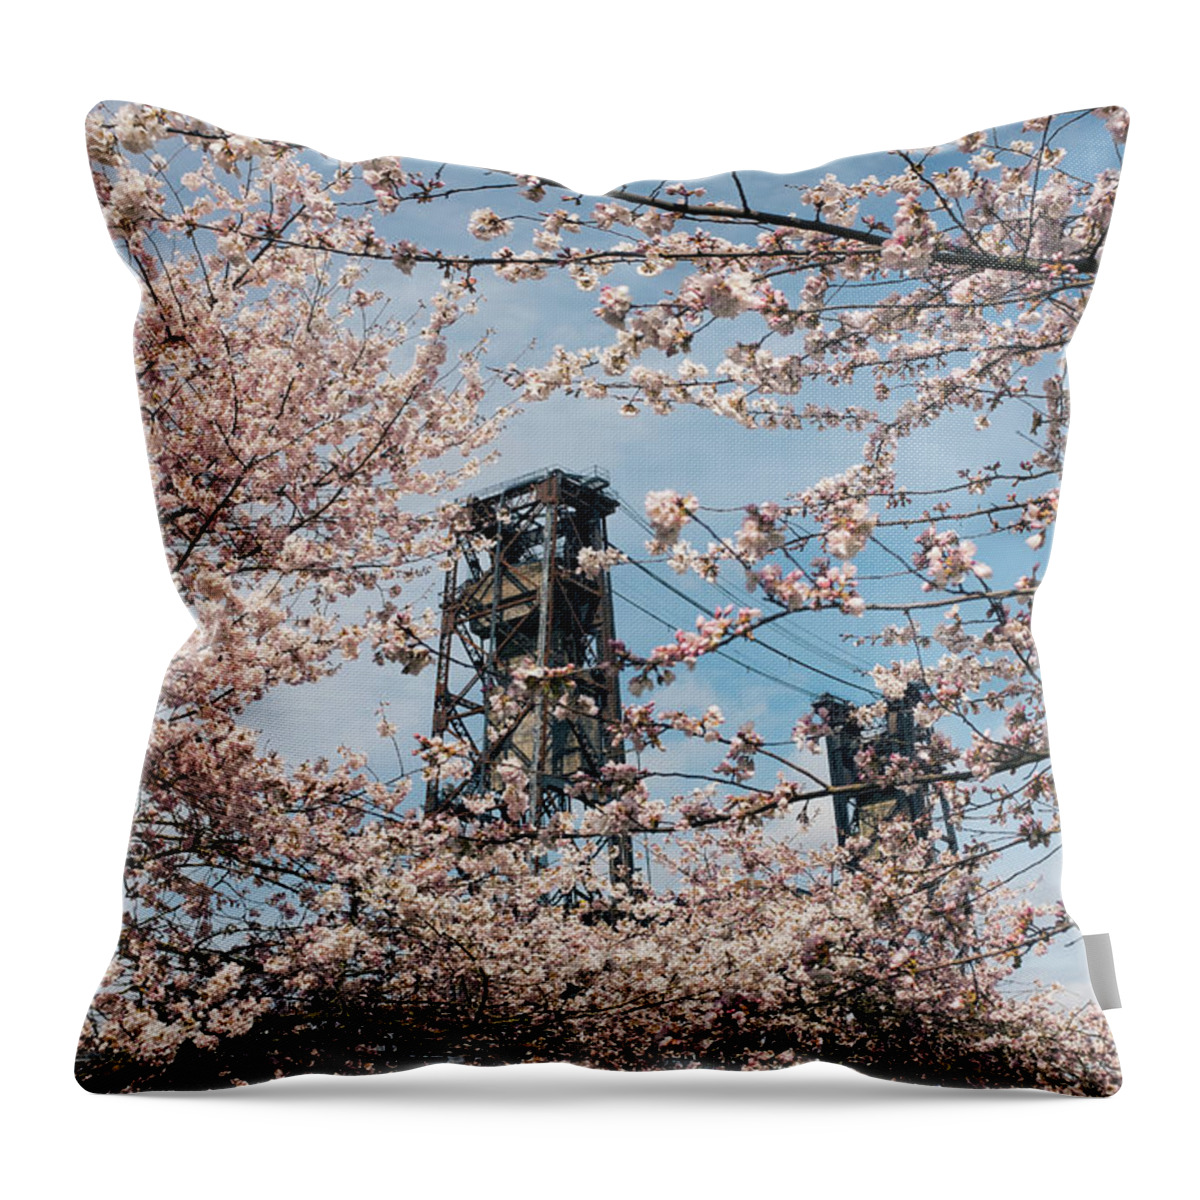 Portland Throw Pillow featuring the photograph Portland Cherry Blossoms by Nicole Young